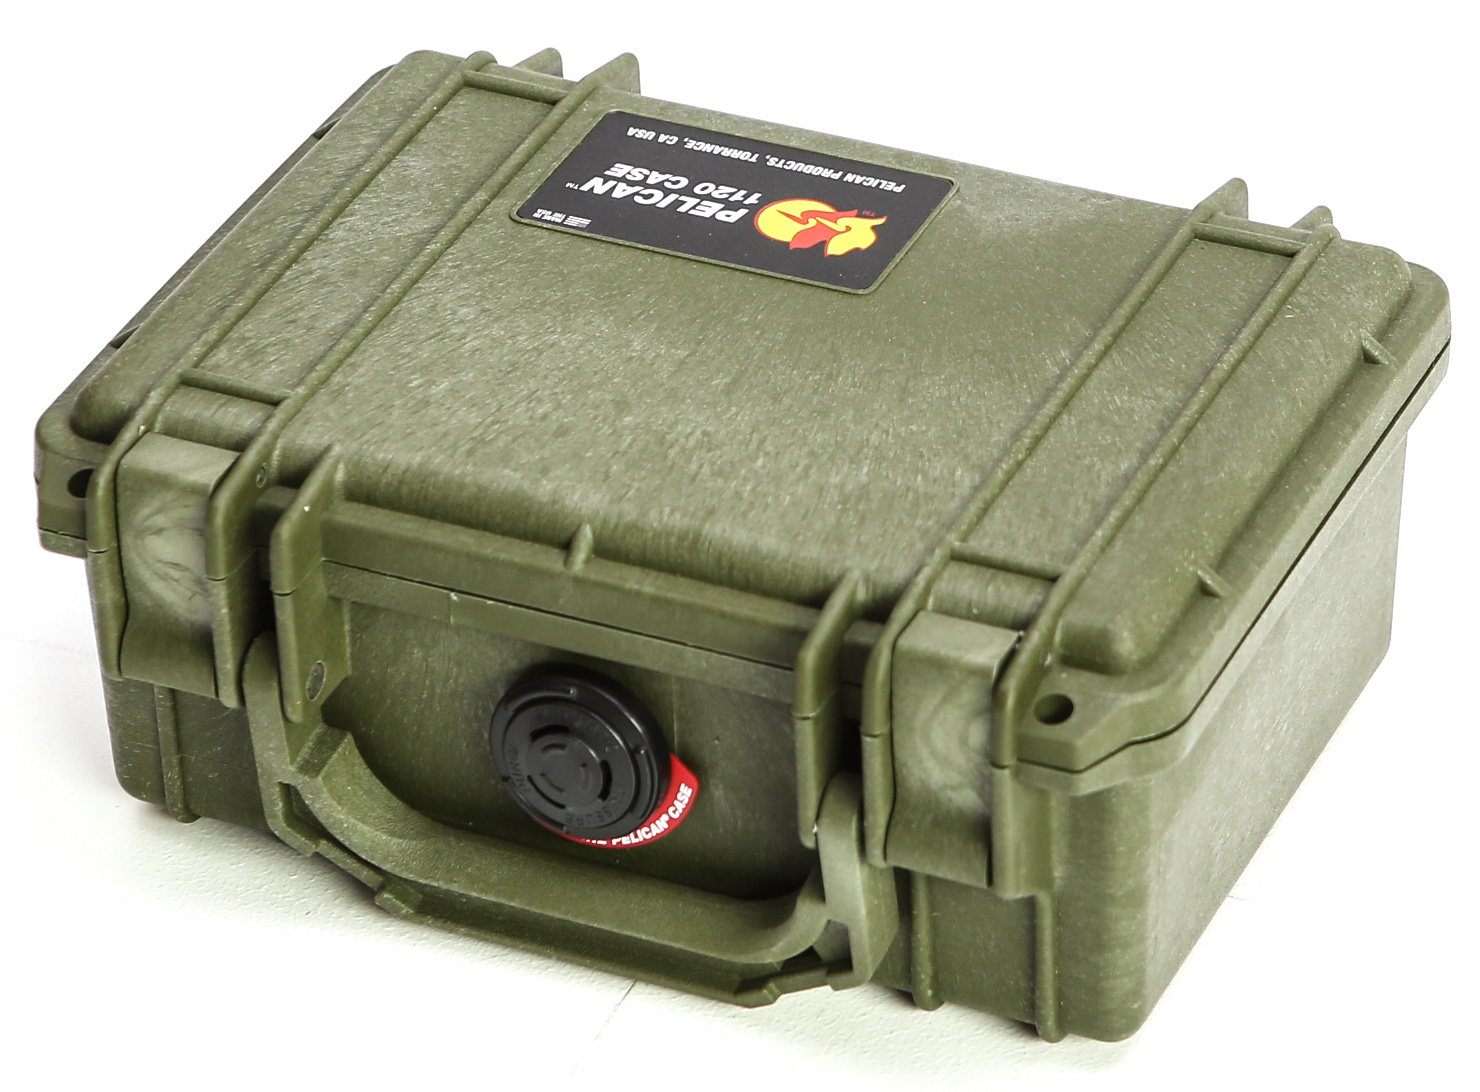 Pelican 1120 Case without Foam (Olive Drab Green)